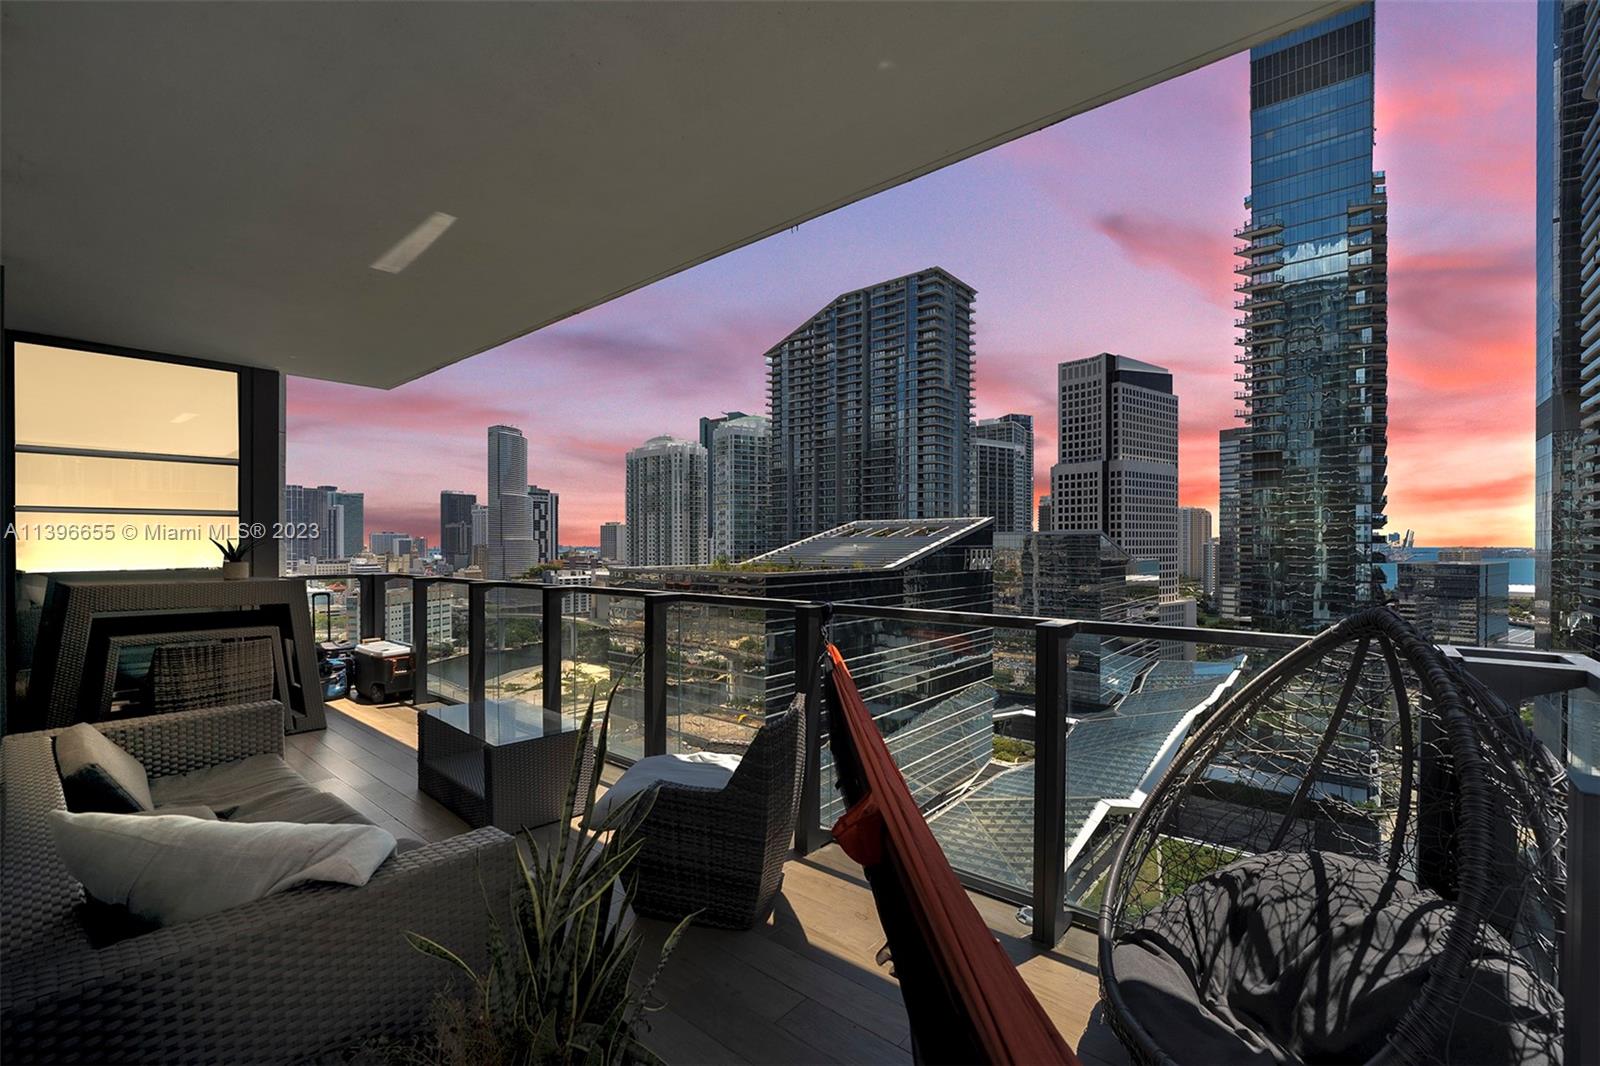 Miami Riches presents 2bed/2bath at Rise condo in Brickell City Centre. Tastefully decorated corner unit with split level plan and high ceilings. Marble floors throughout. Wraparound balcony. State of the art amenities. Tenant occupied until 11/30/23, tenant paying $5,800/month, great tenant!